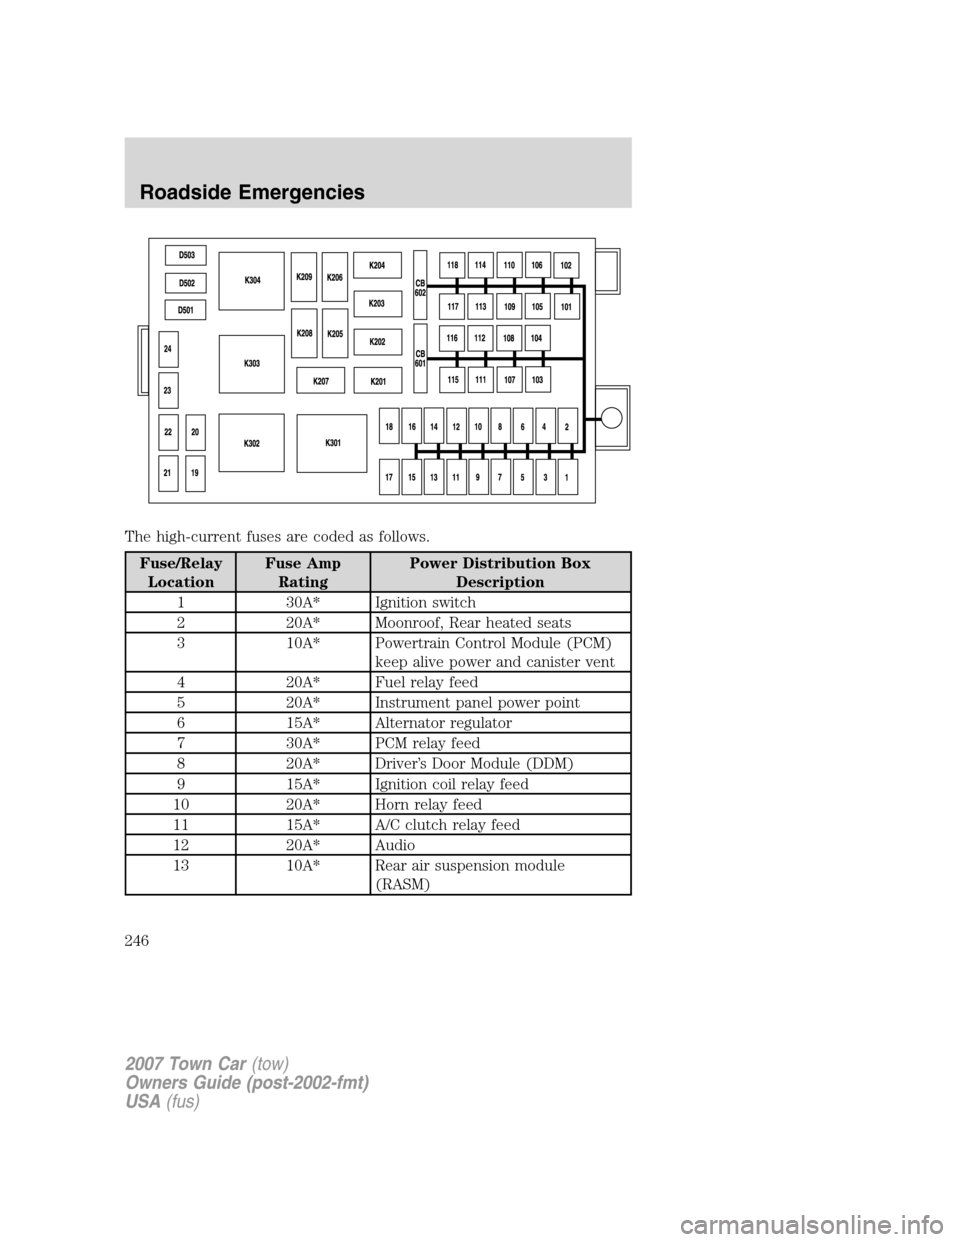 LINCOLN TOWN CAR 2007  Owners Manual The high-current fuses are coded as follows.
Fuse/Relay
LocationFuse Amp
RatingPower Distribution Box
Description
1 30A* Ignition switch
2 20A* Moonroof, Rear heated seats
3 10A* Powertrain Control Mo